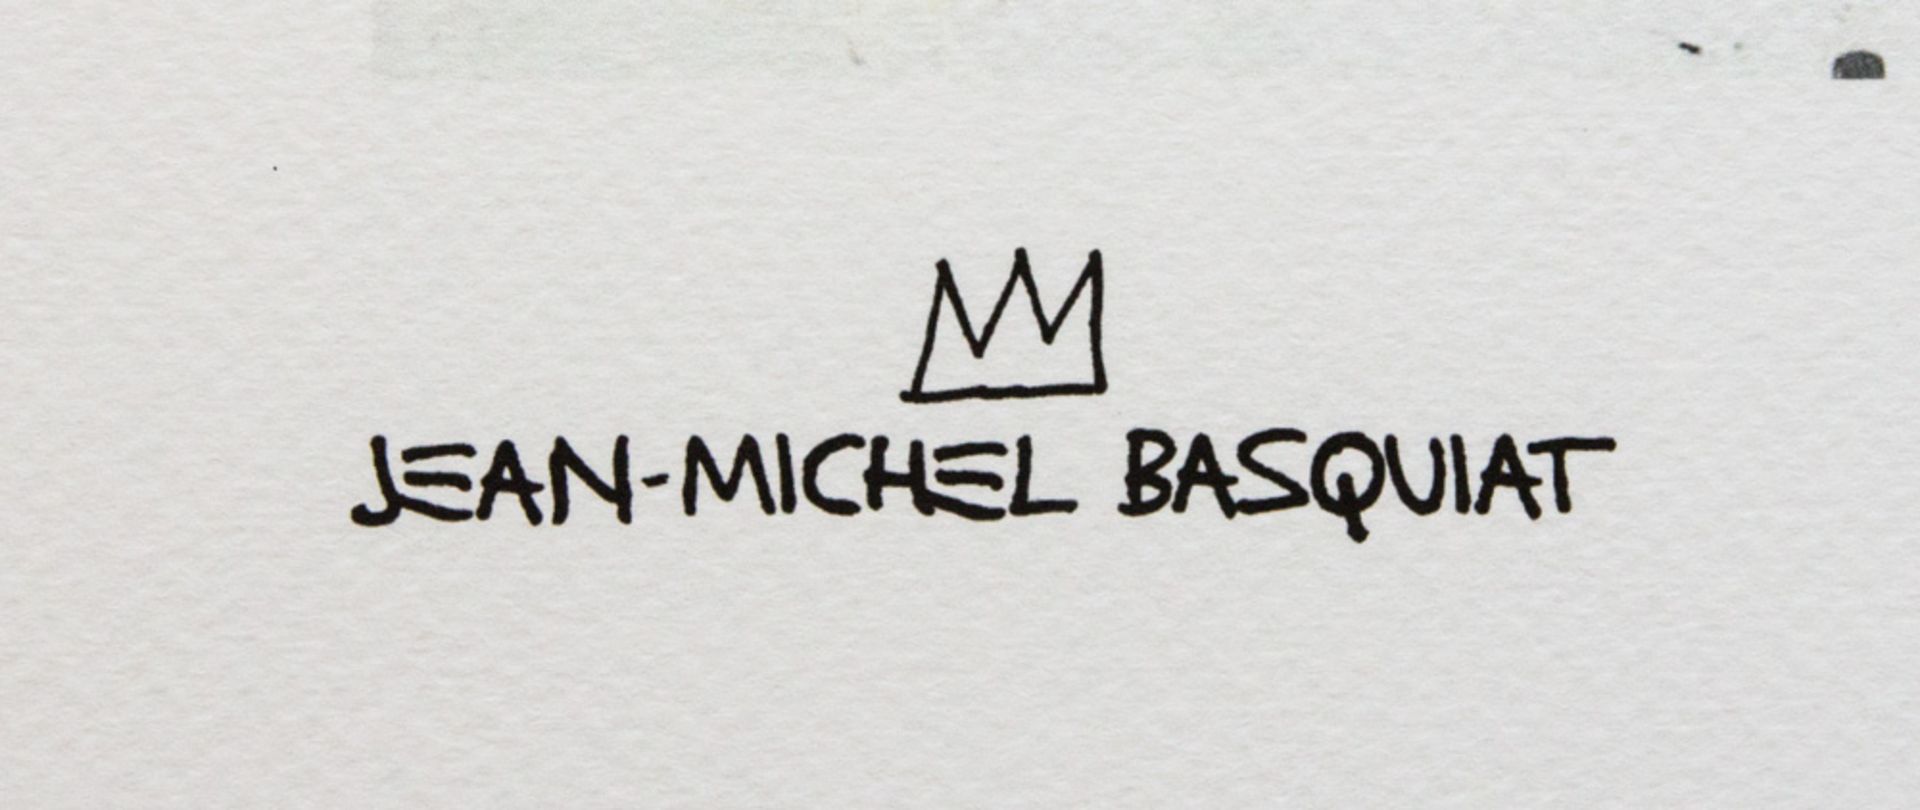 Jean-Michel Basquiat 'Love Dub For A' - Image 4 of 5